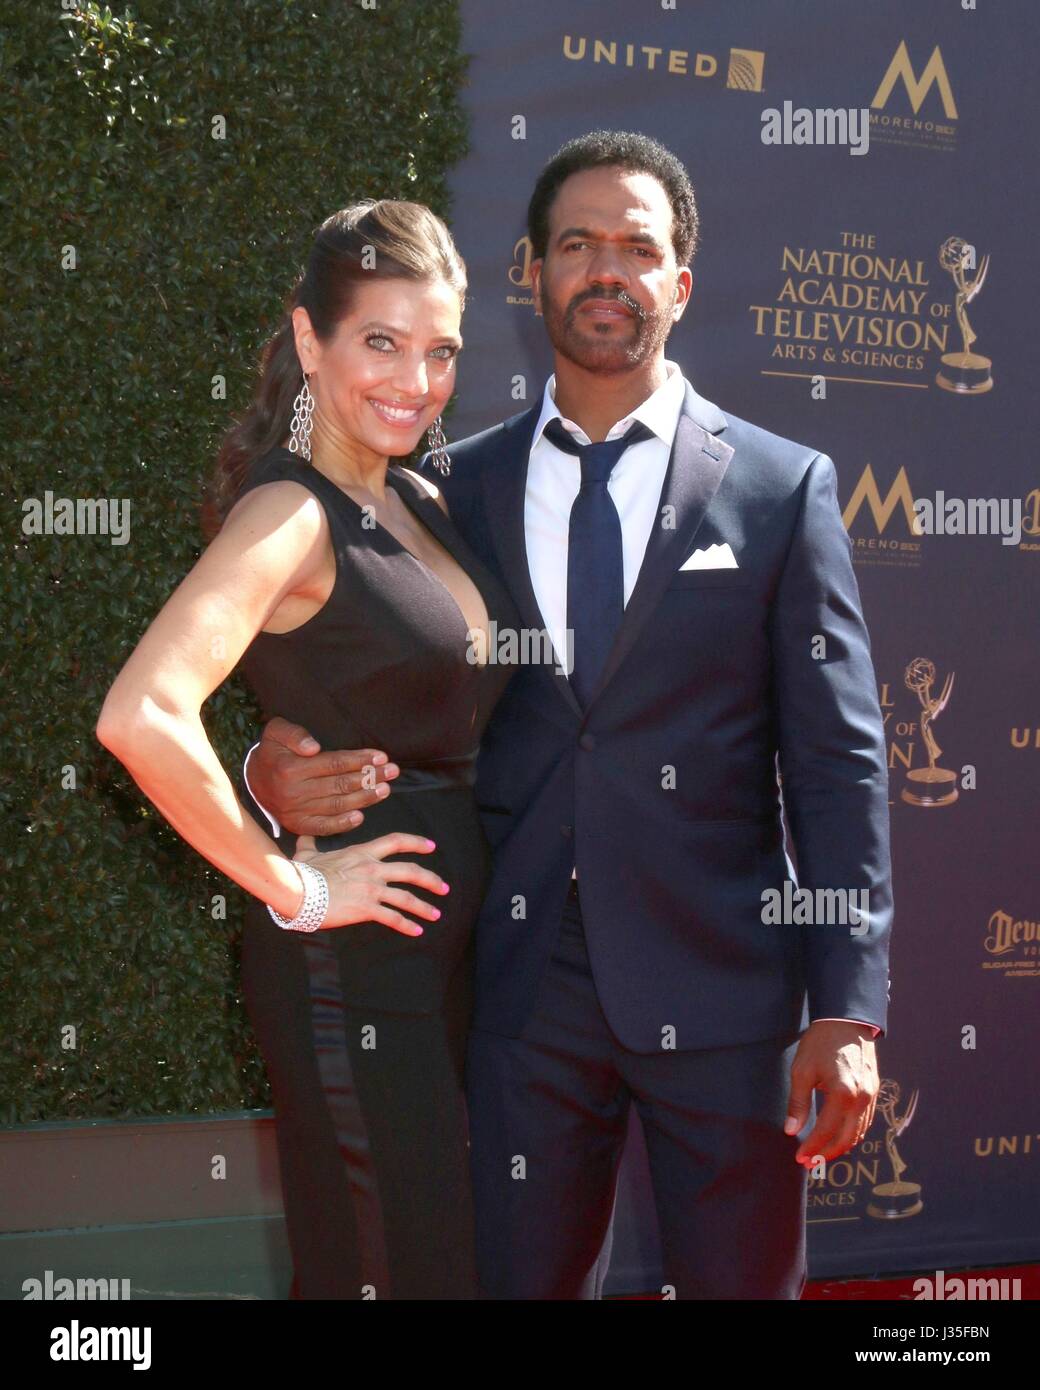 Pasadena, CA. 30th Apr, 2017. Girlfriend, Kristoff St. John at arrivals for 44th Annual Daytime Emmy Awards - Arrivals 2, Pasadena Civic Center, Pasadena, CA April 30, 2017. Credit: Priscilla Grant/Everett Collection/Alamy Live News Stock Photo